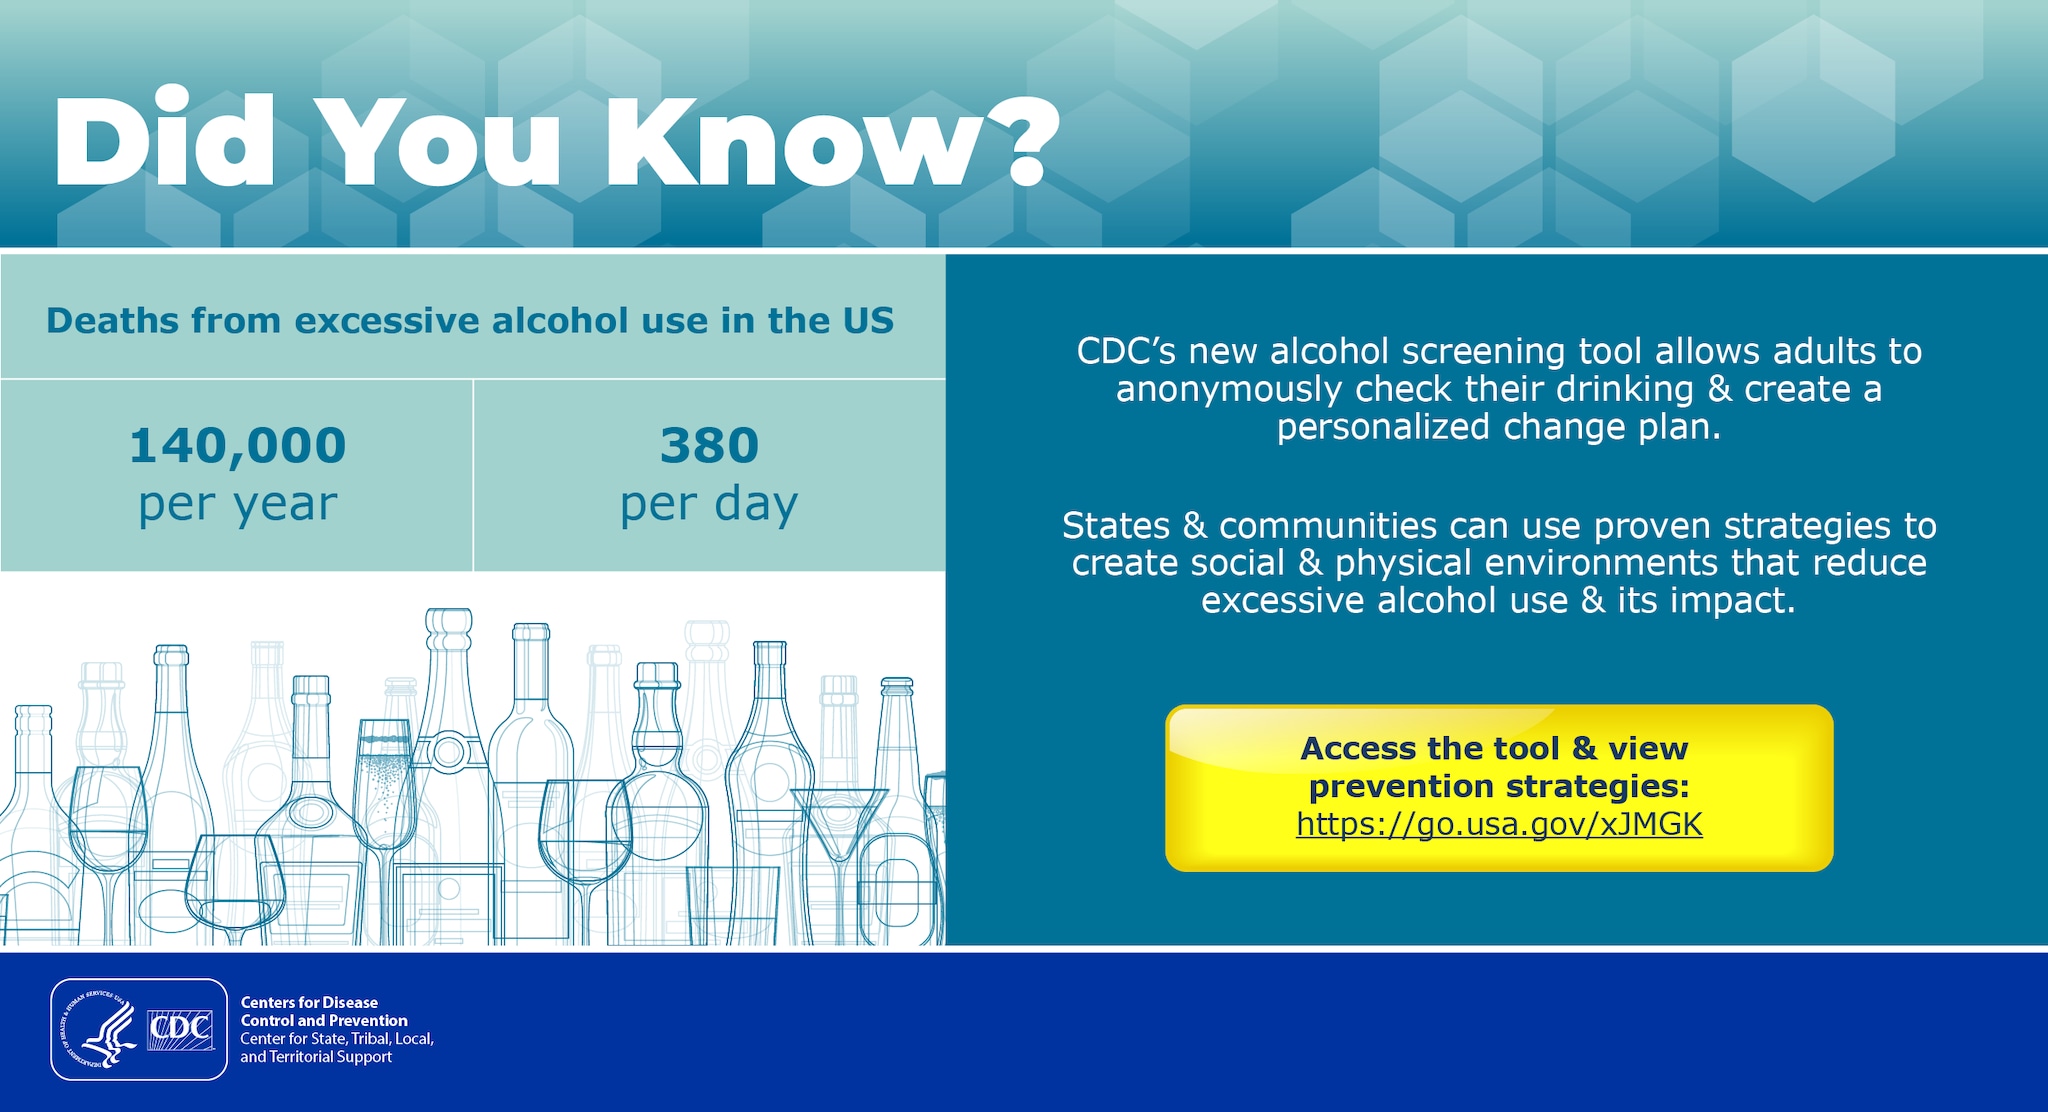 A graphic titled Did You Know? shows the outline of wine bottles and glasses below text that says: In the US, 140,000 people die per year and 380 people die per day from excessive alcohol use. CDC’s new alcohol screening tool allows adults to anonymously check their drinking & create a personalized change plan. States & communities can use proven strategies to create social & physical environments that reduce excessive alcohol use & its impact. Access the tool & view prevention strategies: https://go.usa.gov/xJMGK